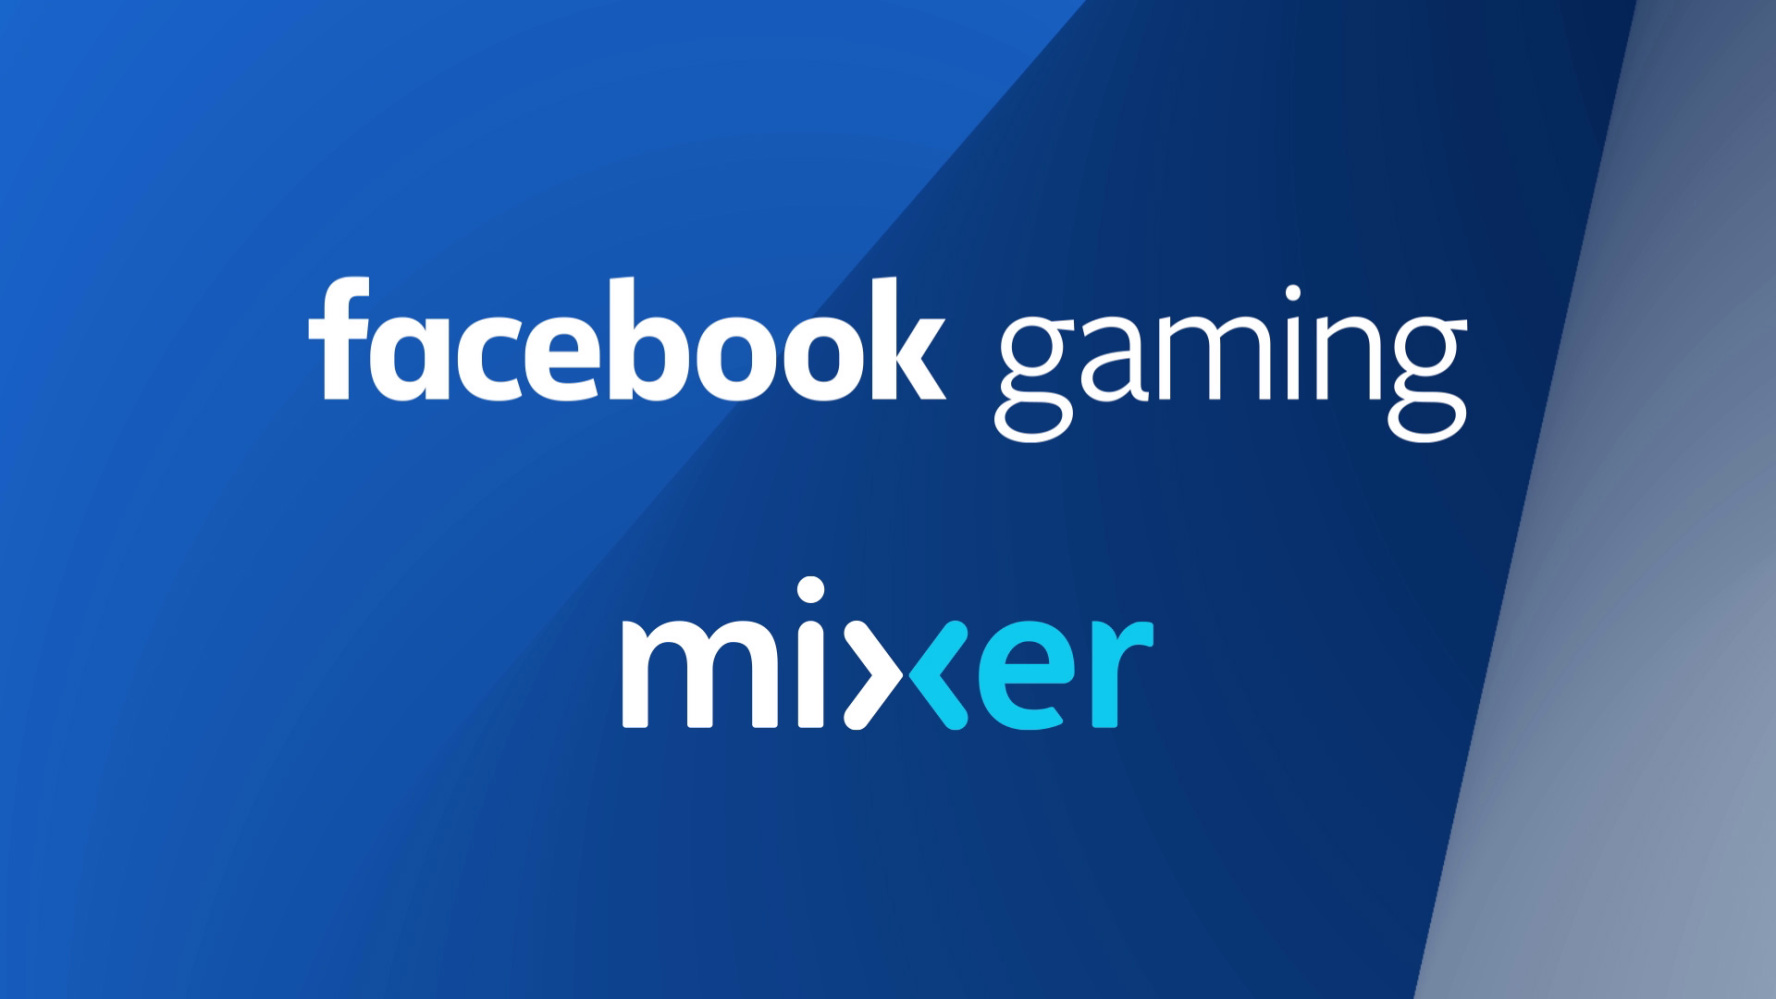 Microsoft are shutting down Mixer and transitioning to Facebook Gaming